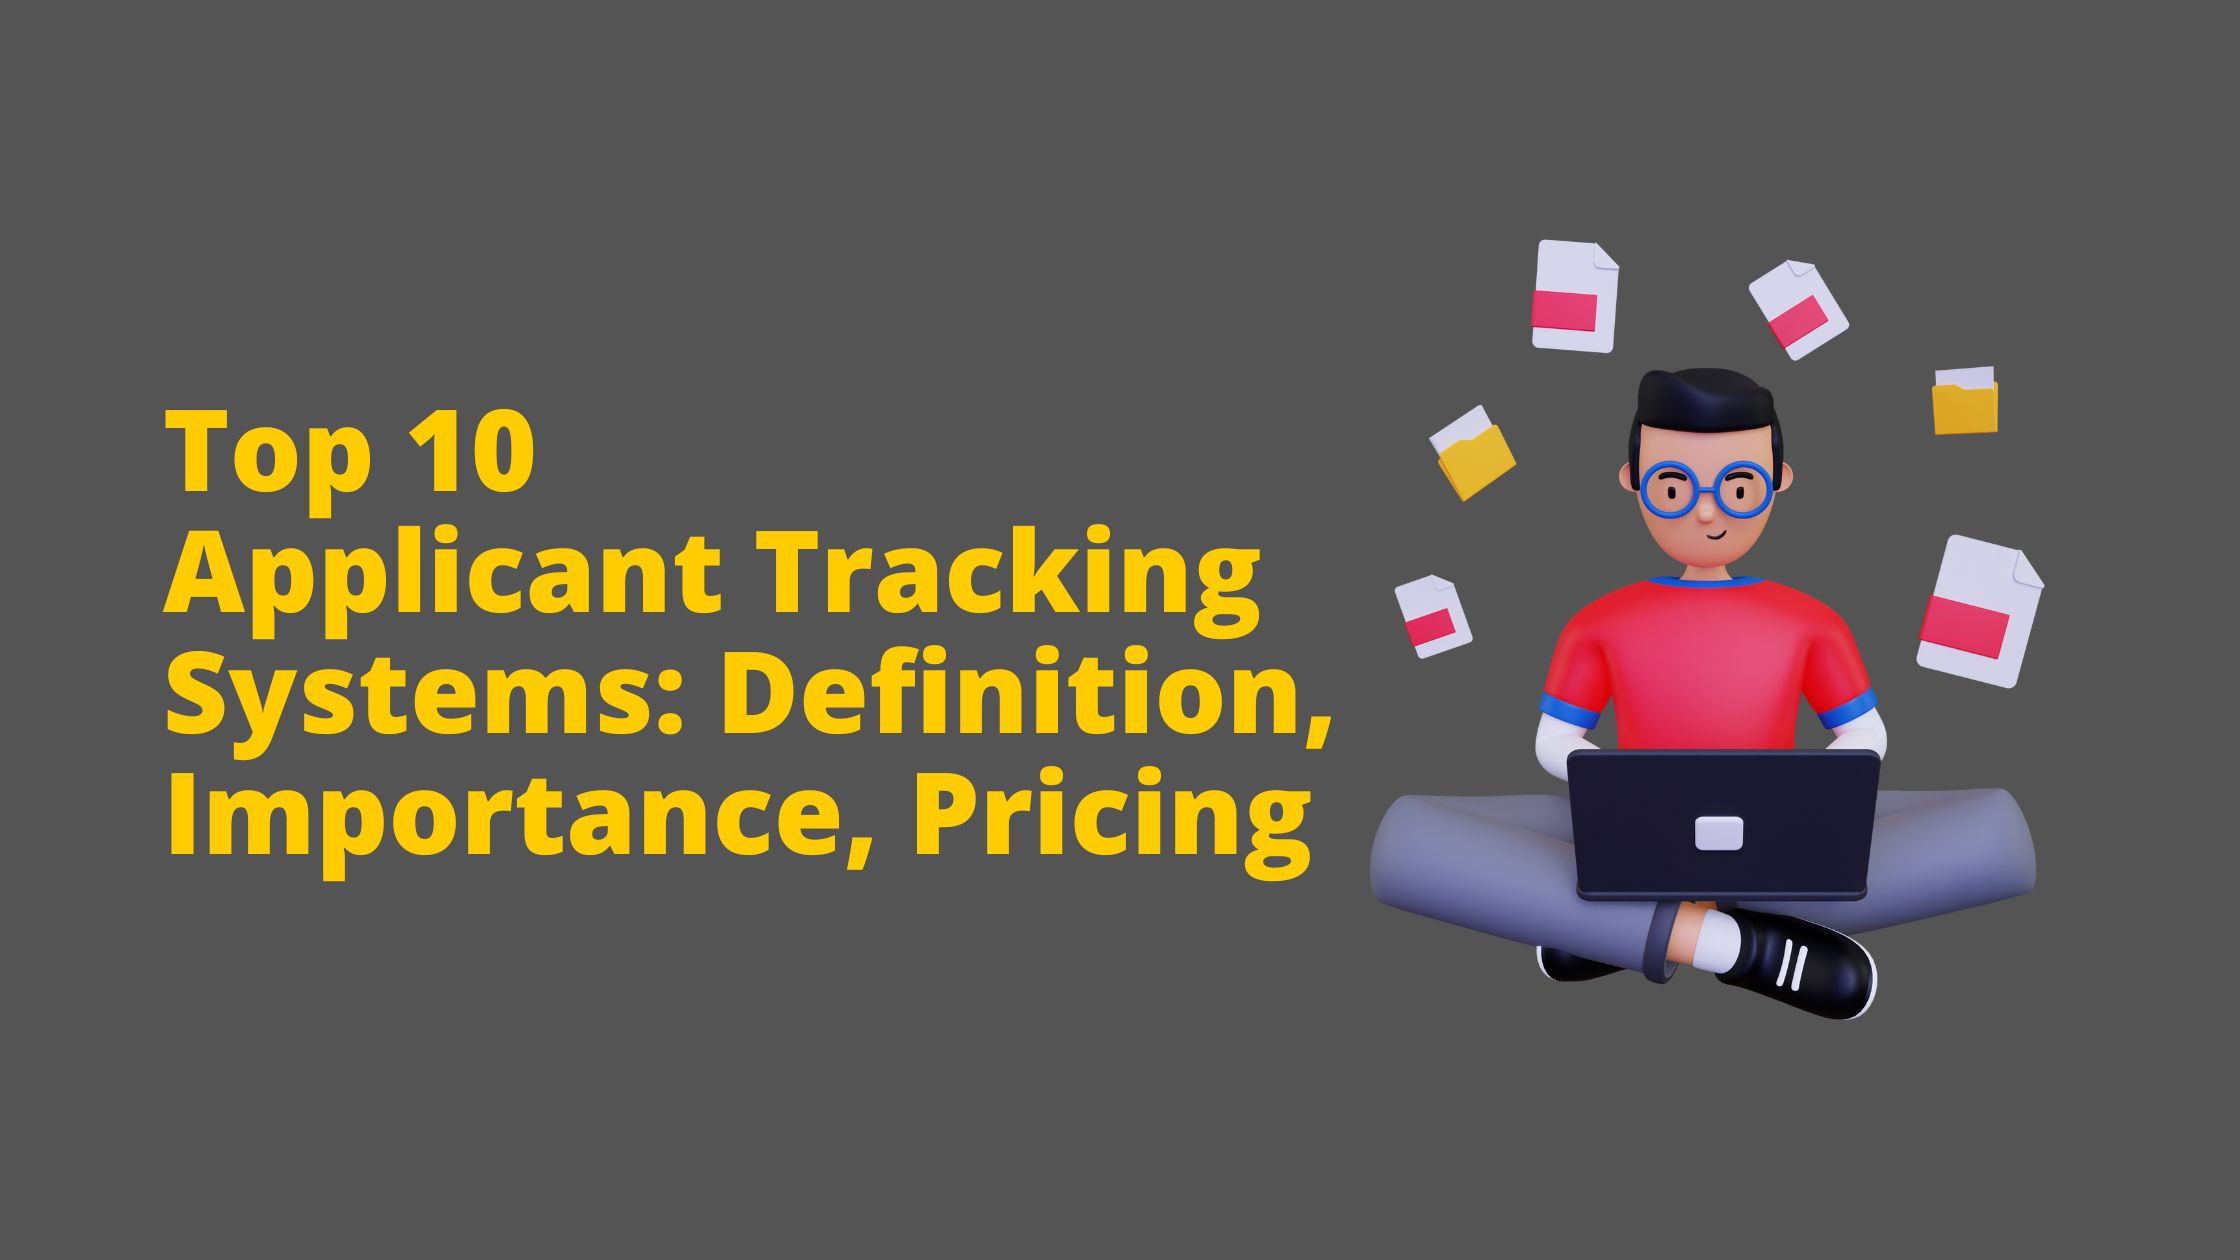 Top 10 Applicant Tracking Systems Definition, Importance, Pricing